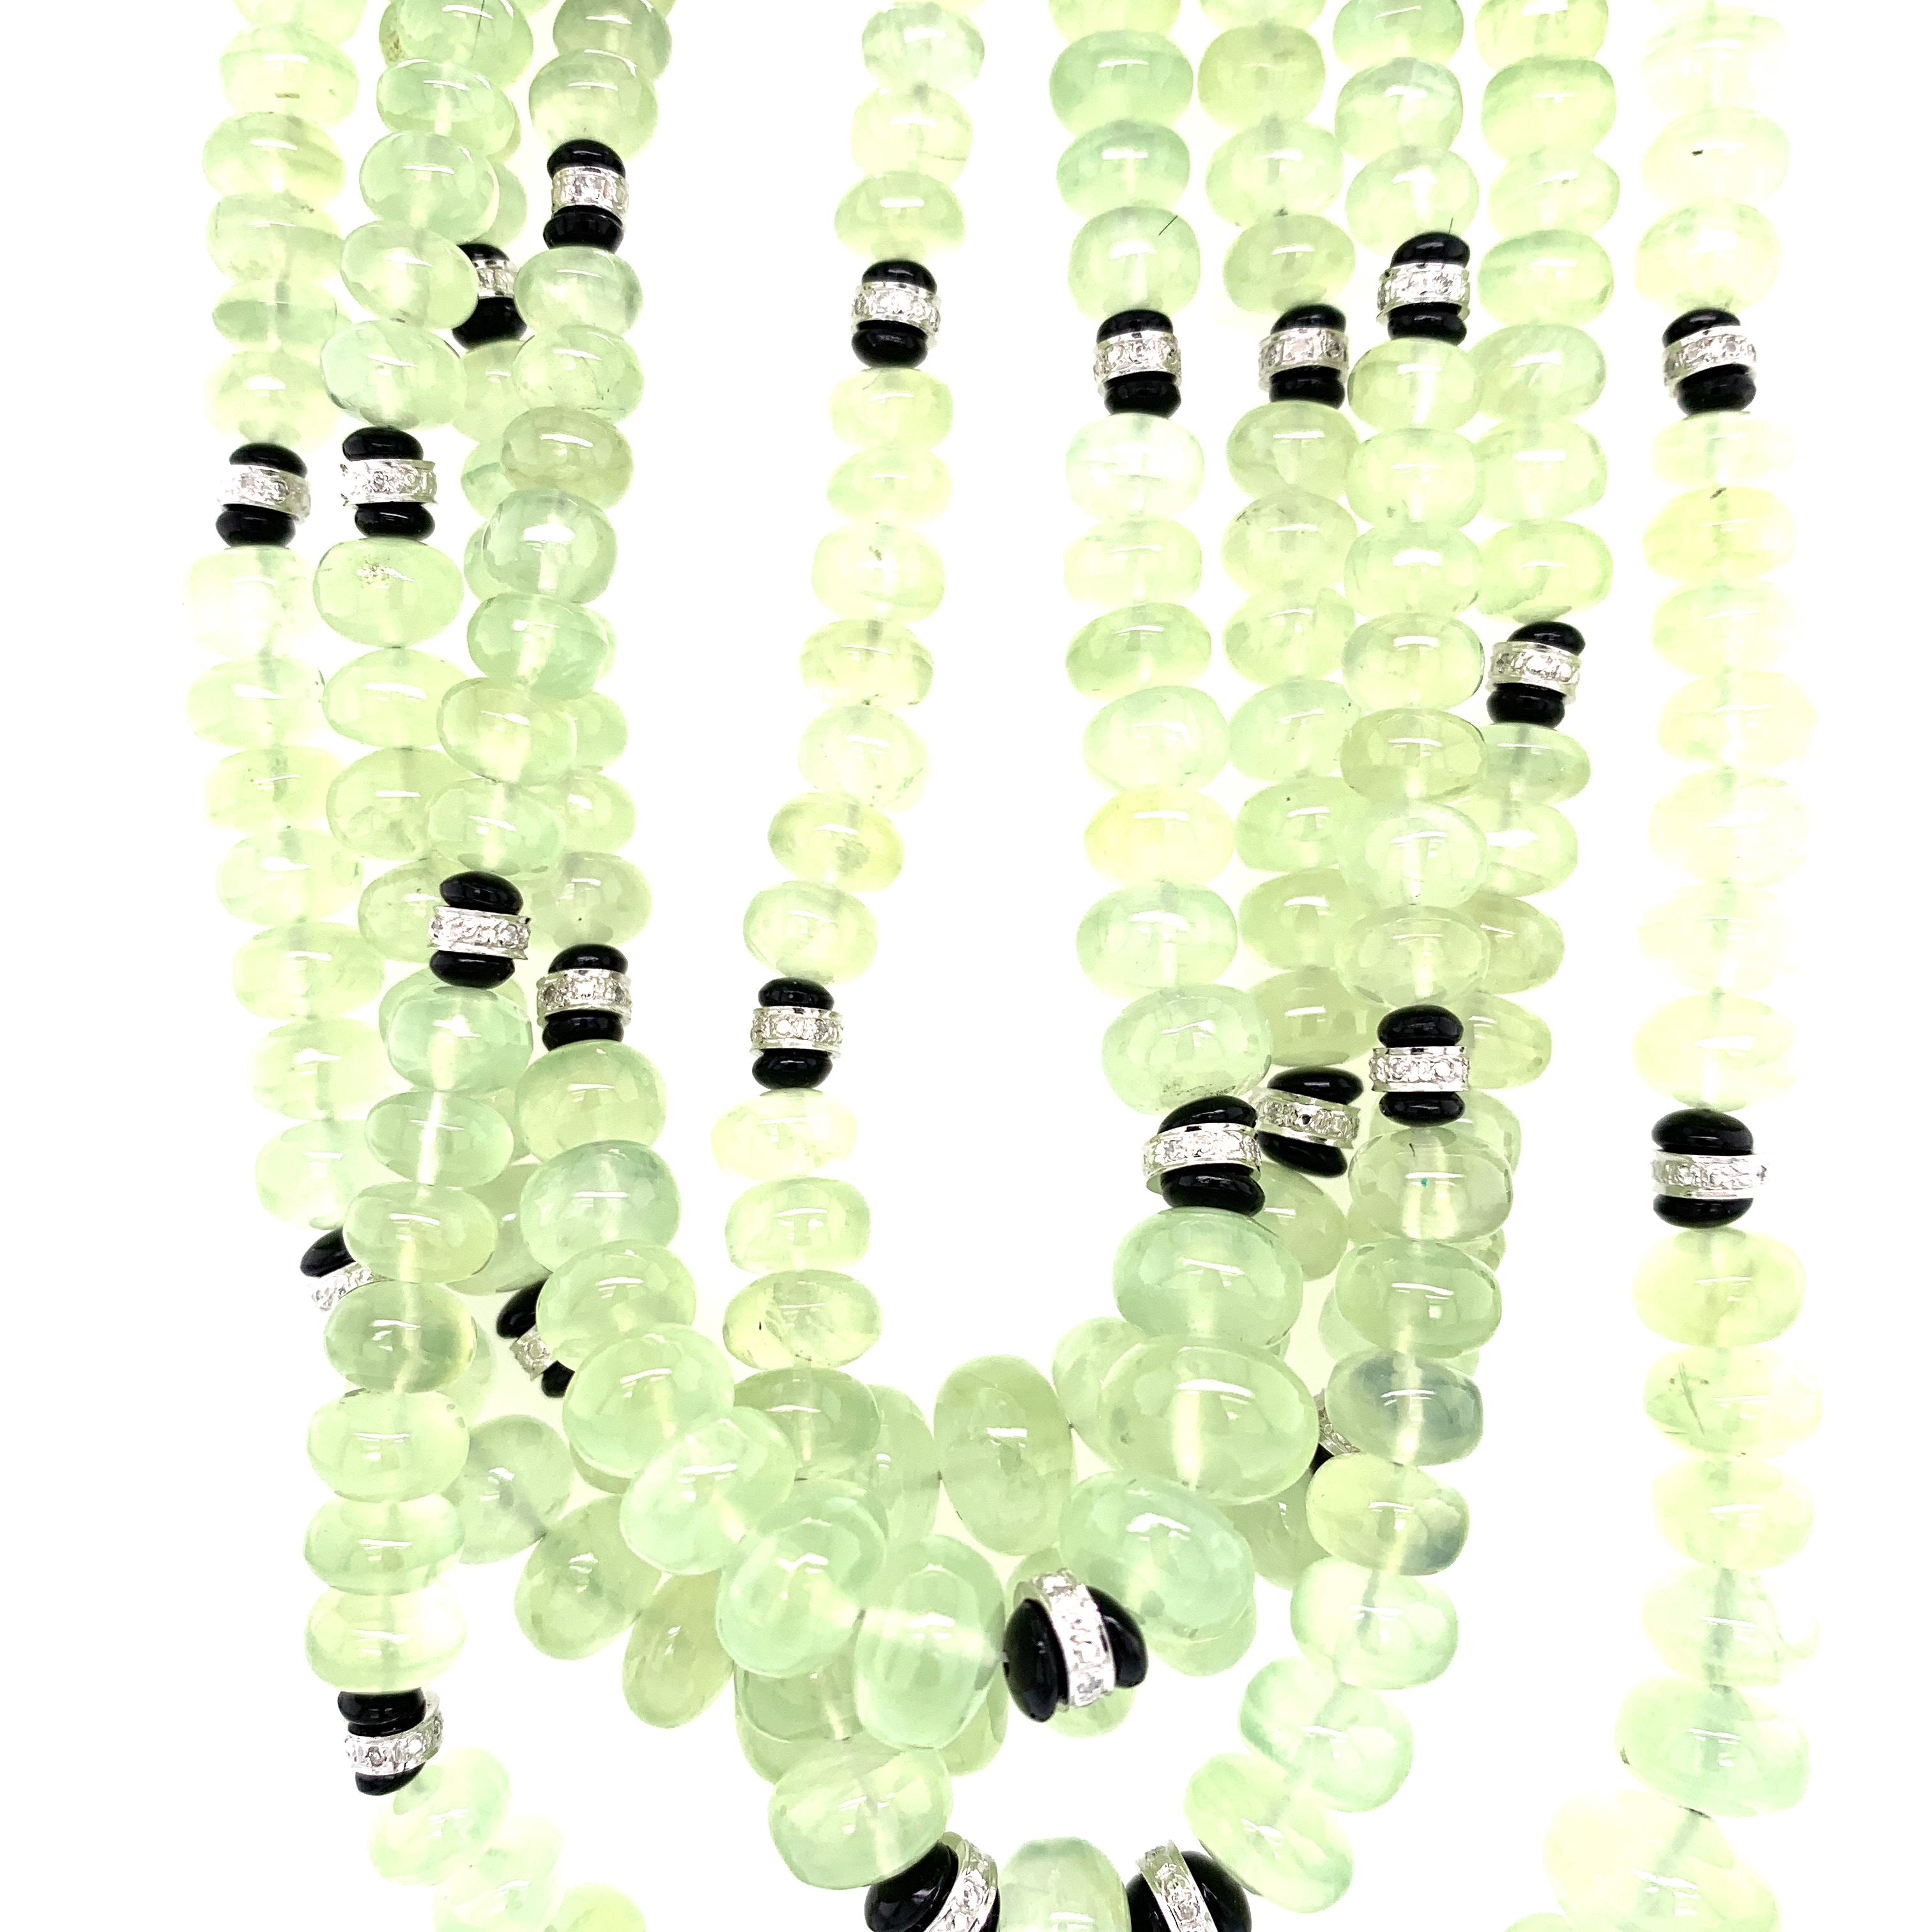 Green Prehnite Beads and White Diamond Clasp Gold Multi-Strand Necklace :

An unusual and beautiful necklace, it features hard-to-find green prehnite beads weighing 945.09 carat, with 50 white round brilliant diamond rondelles interspersed between